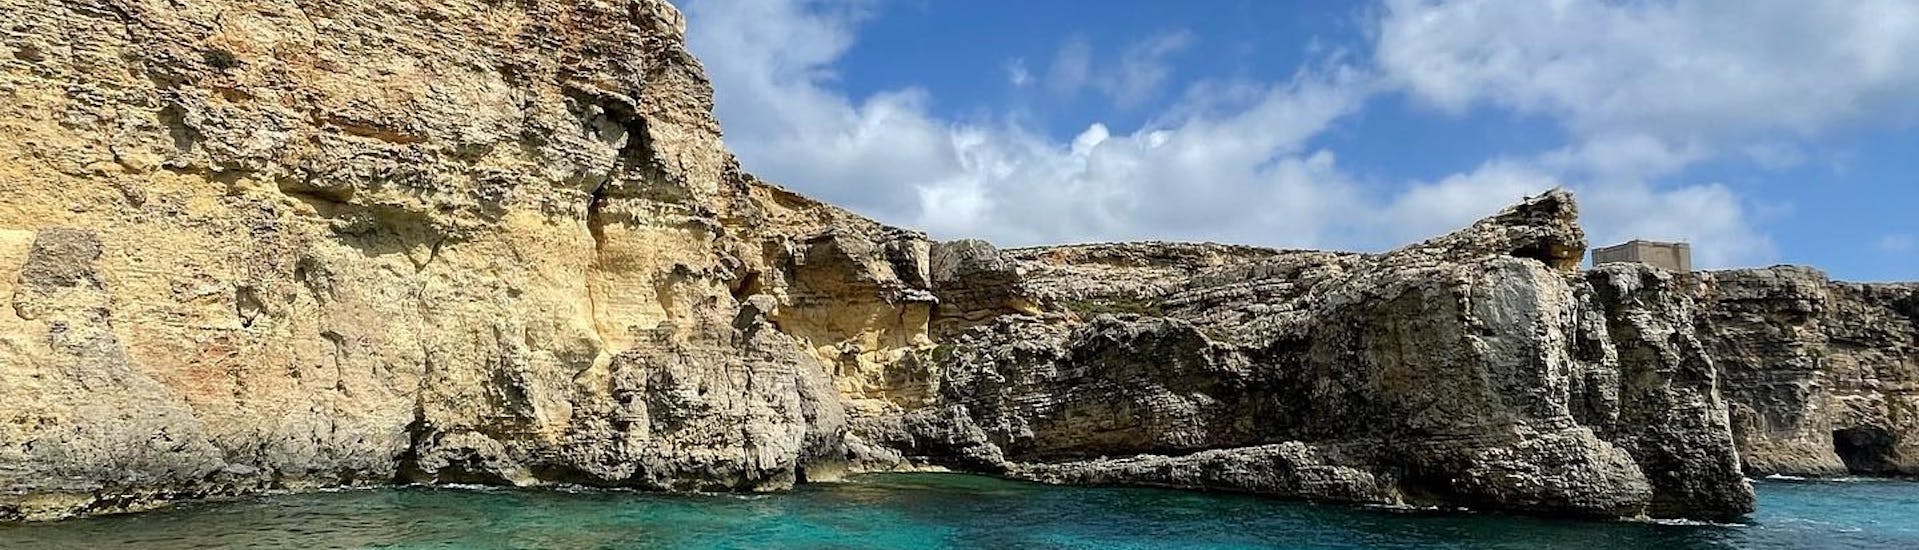 The coast during the Boat Trip to Comino Caves & Blue Lagoon with Swimming & Snorkeling with Oh Yeah Malta.